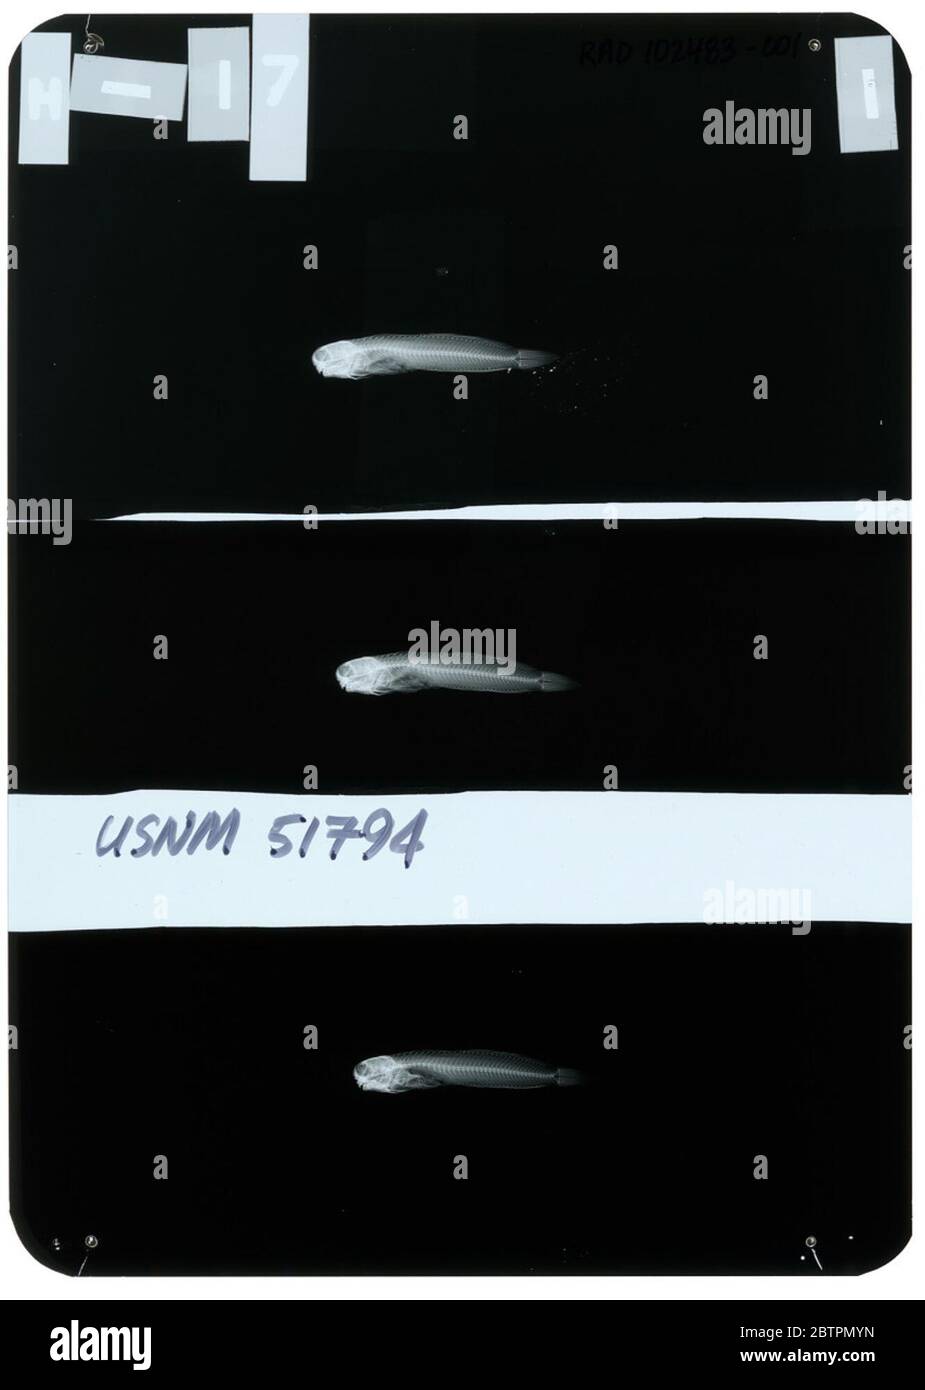 Salarias bryani Jordan Seale. Radiograph is of a holotype; The Smithsonian NMNH Division of Fishes uses the convention of maintaining the original species name for type specimens designated at the time of description. The currently accepted name for this species is Blenniella chrysospilos.24 Oct 20181 Stock Photo